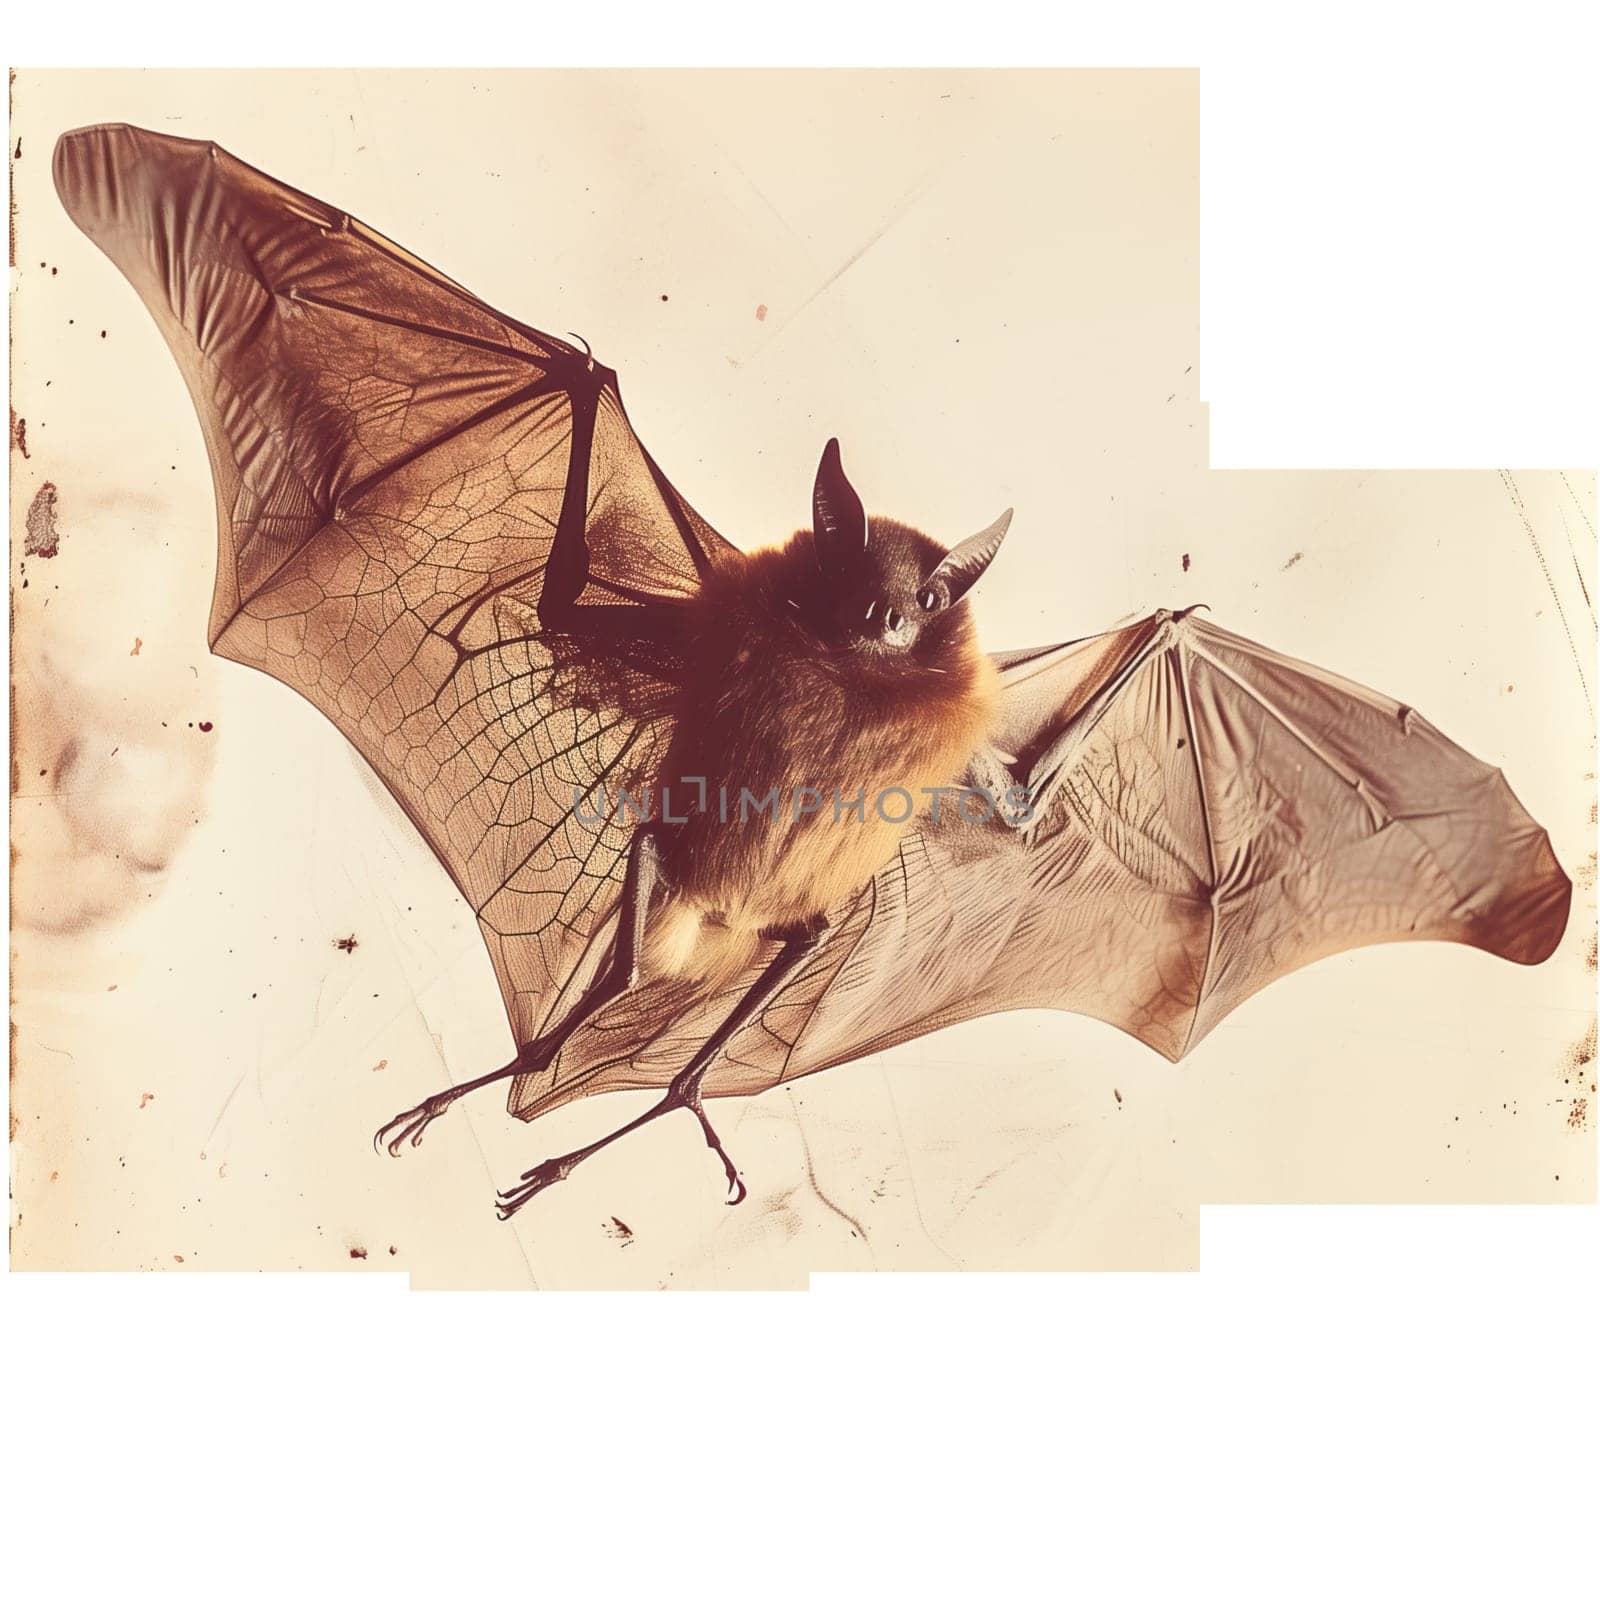 Cut out faded photo of halloween bat by Dustick